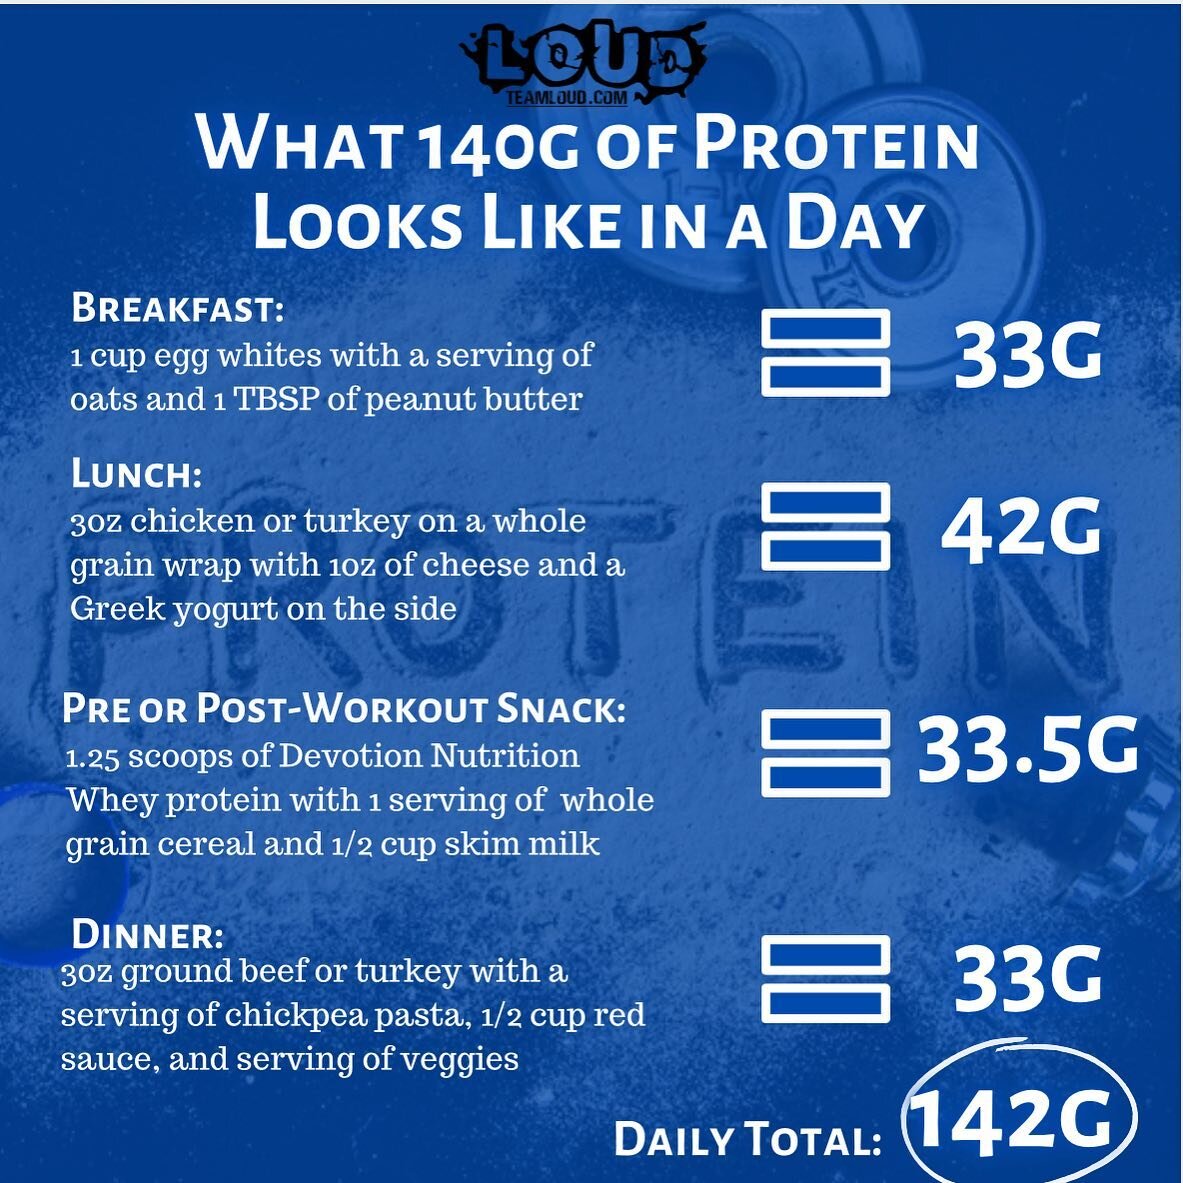 Getting in adequate protein, for most, is HARD. Protein is 100% the most important part of our diet, and the most neglected macronutrient of the three. The American diet favors higher fat, moderate carb and low protein

This is a quick example of how